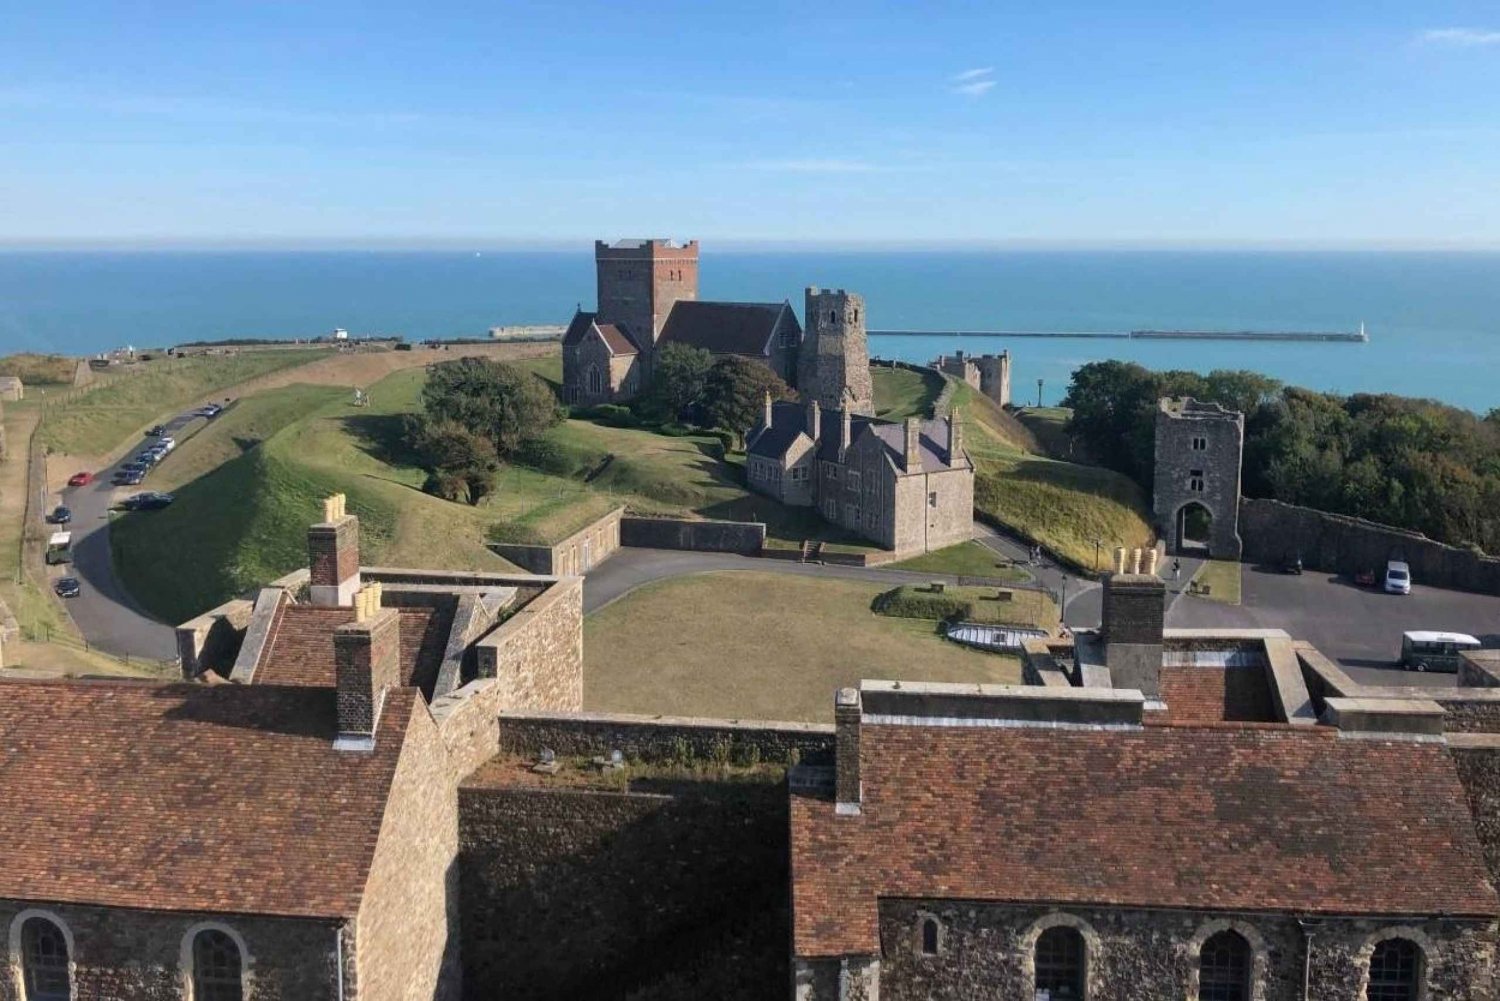 London: Canterbury Cathedral, Dover Castle, and White Cliffs